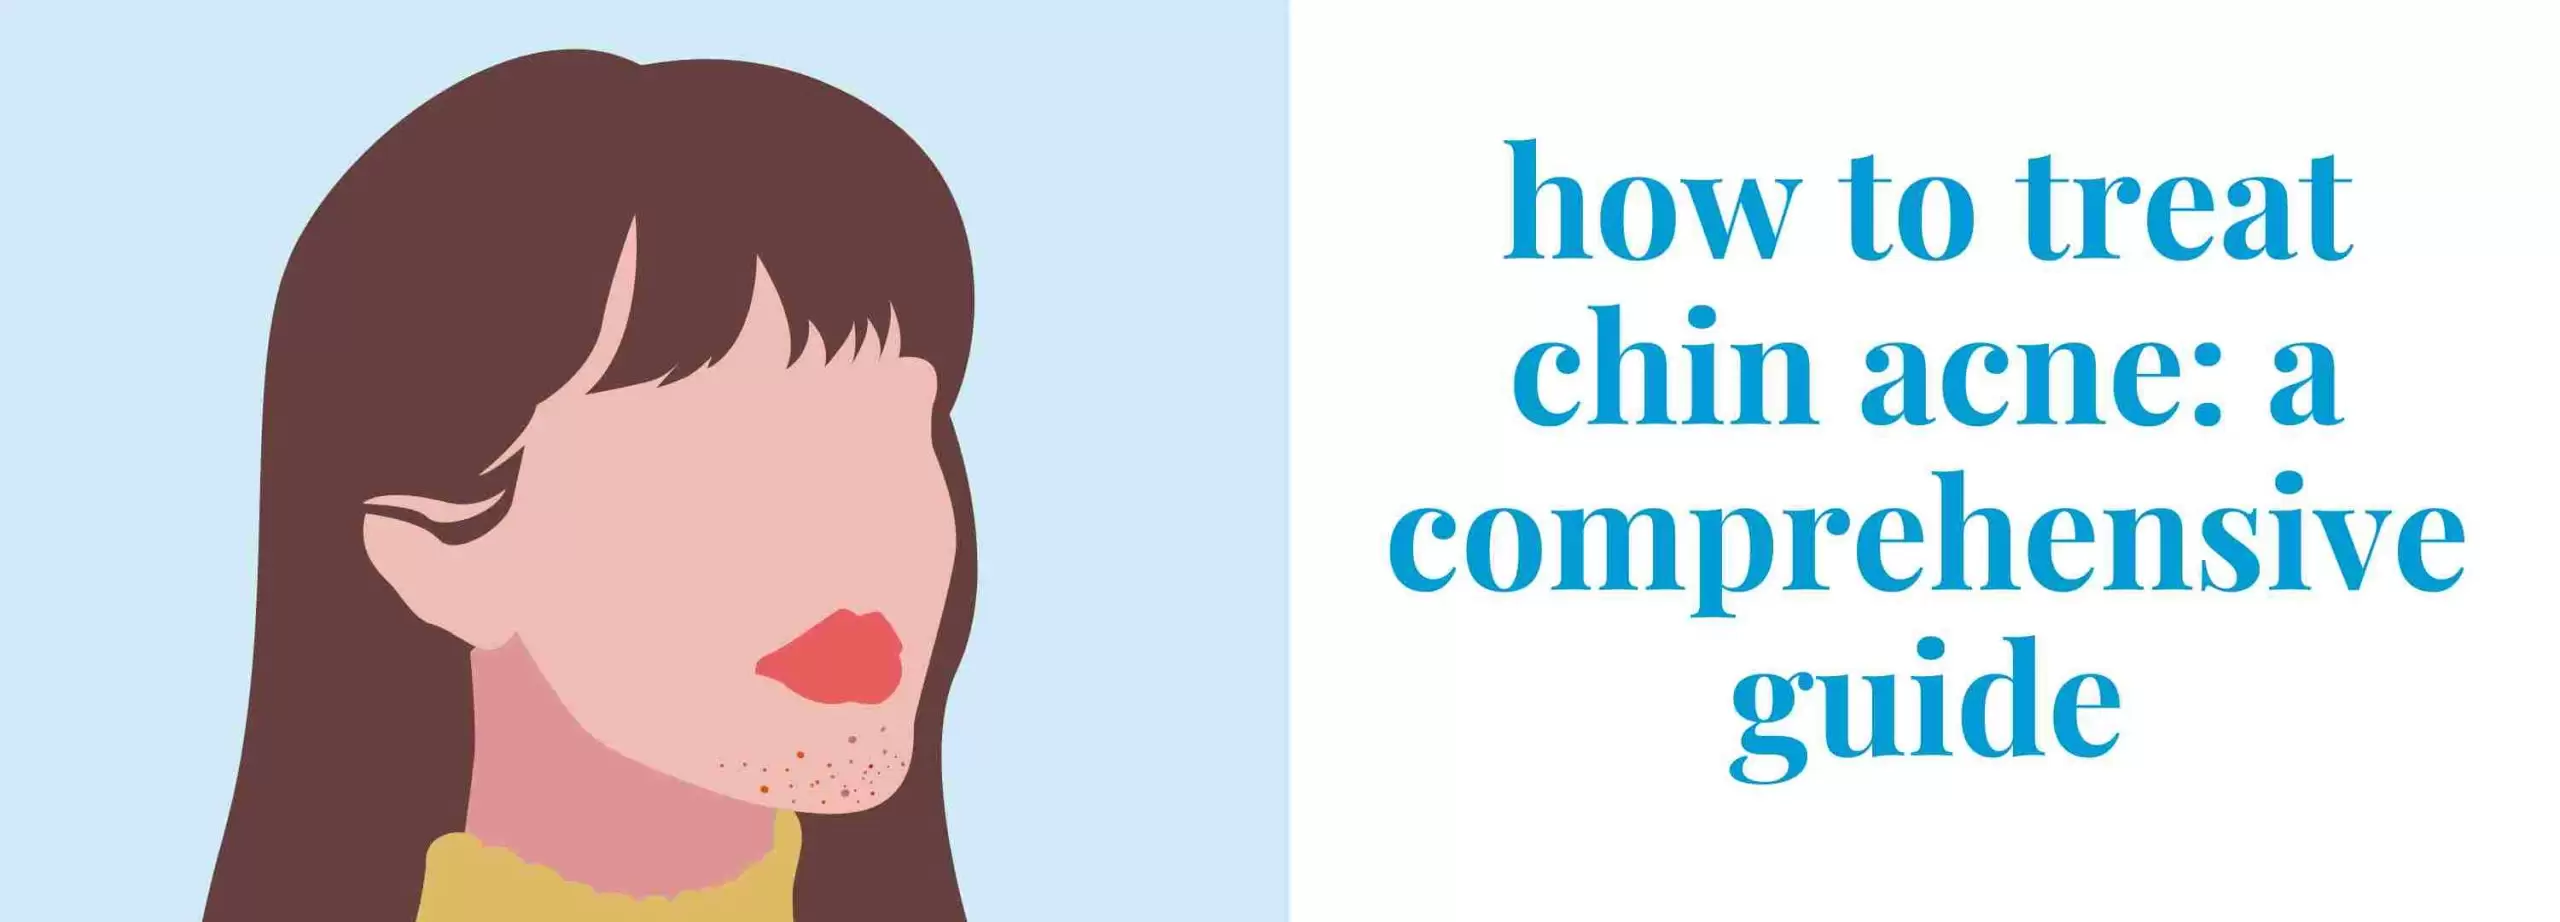 How to treat chin acne: a comprehensive guide